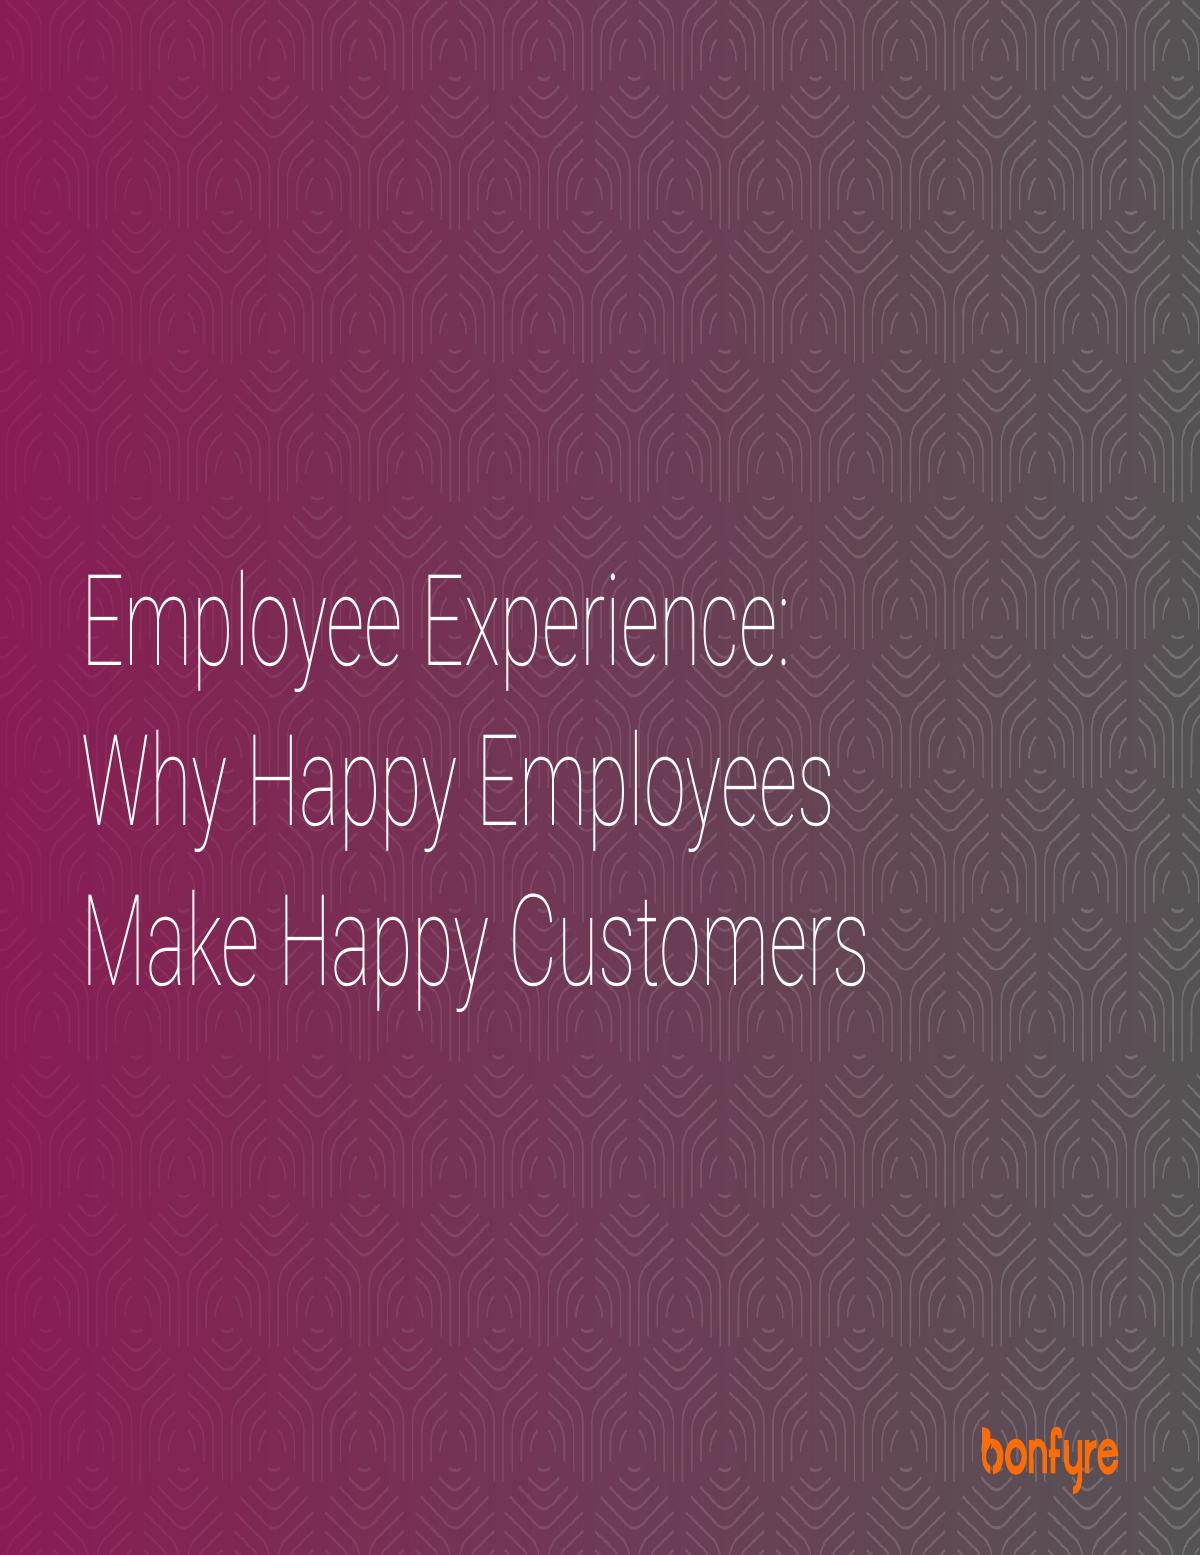 Employee Experience: Why Happy Employees Make Happy Customers (ebook)